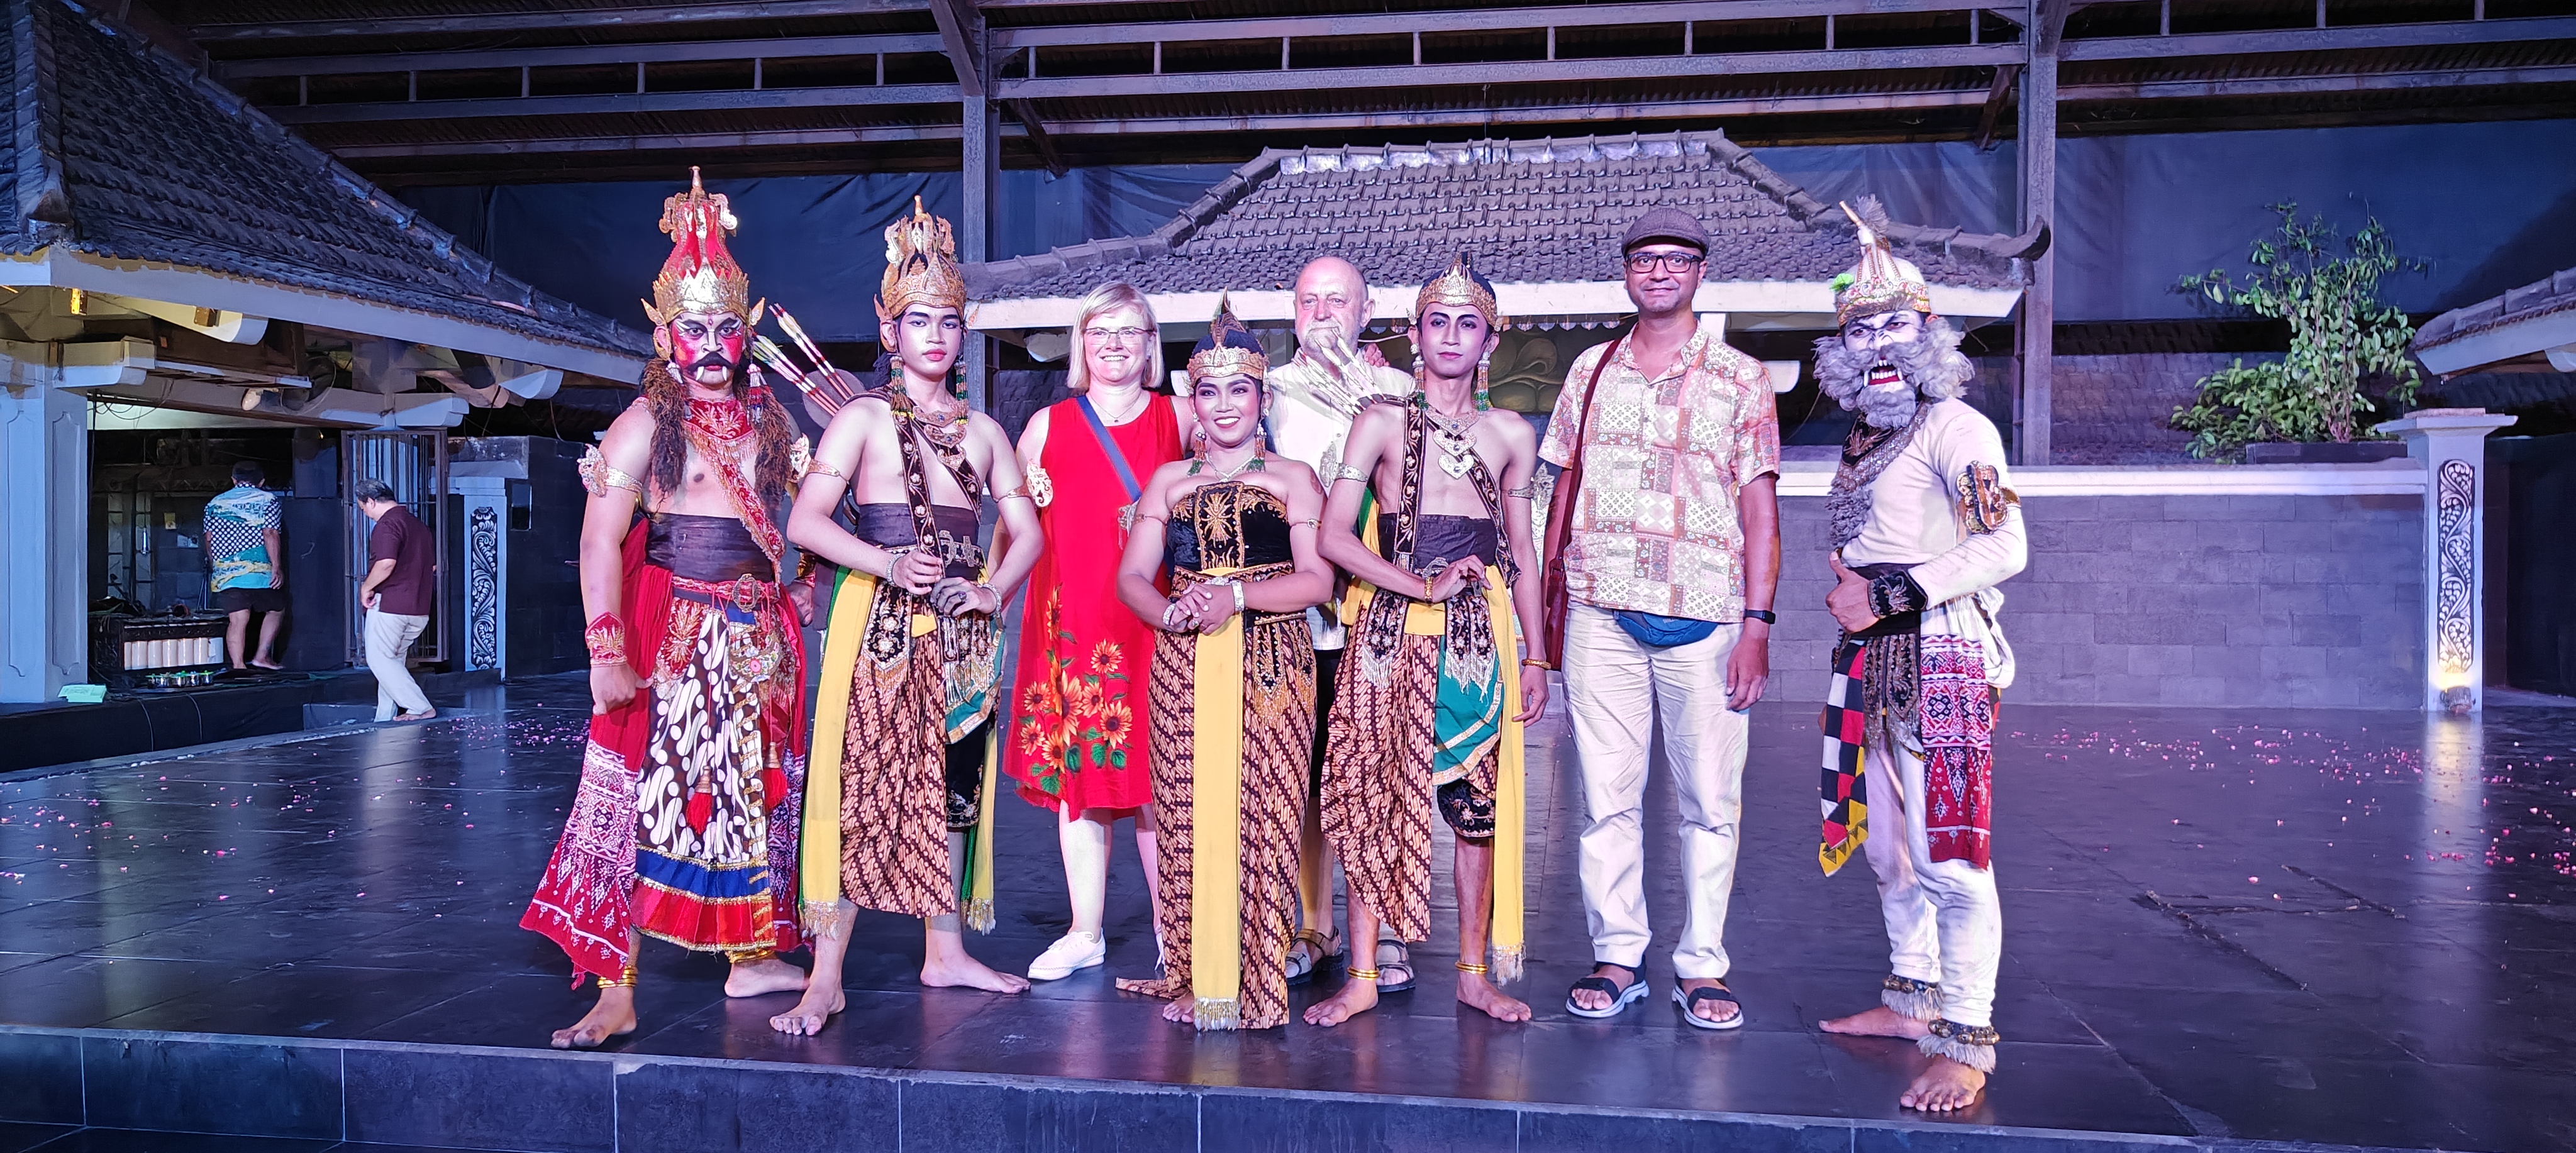 Ramayana Ballet cast and crew (and one member of the audience!). Hanuman is a funny, adorable white monkey in Indonesia.